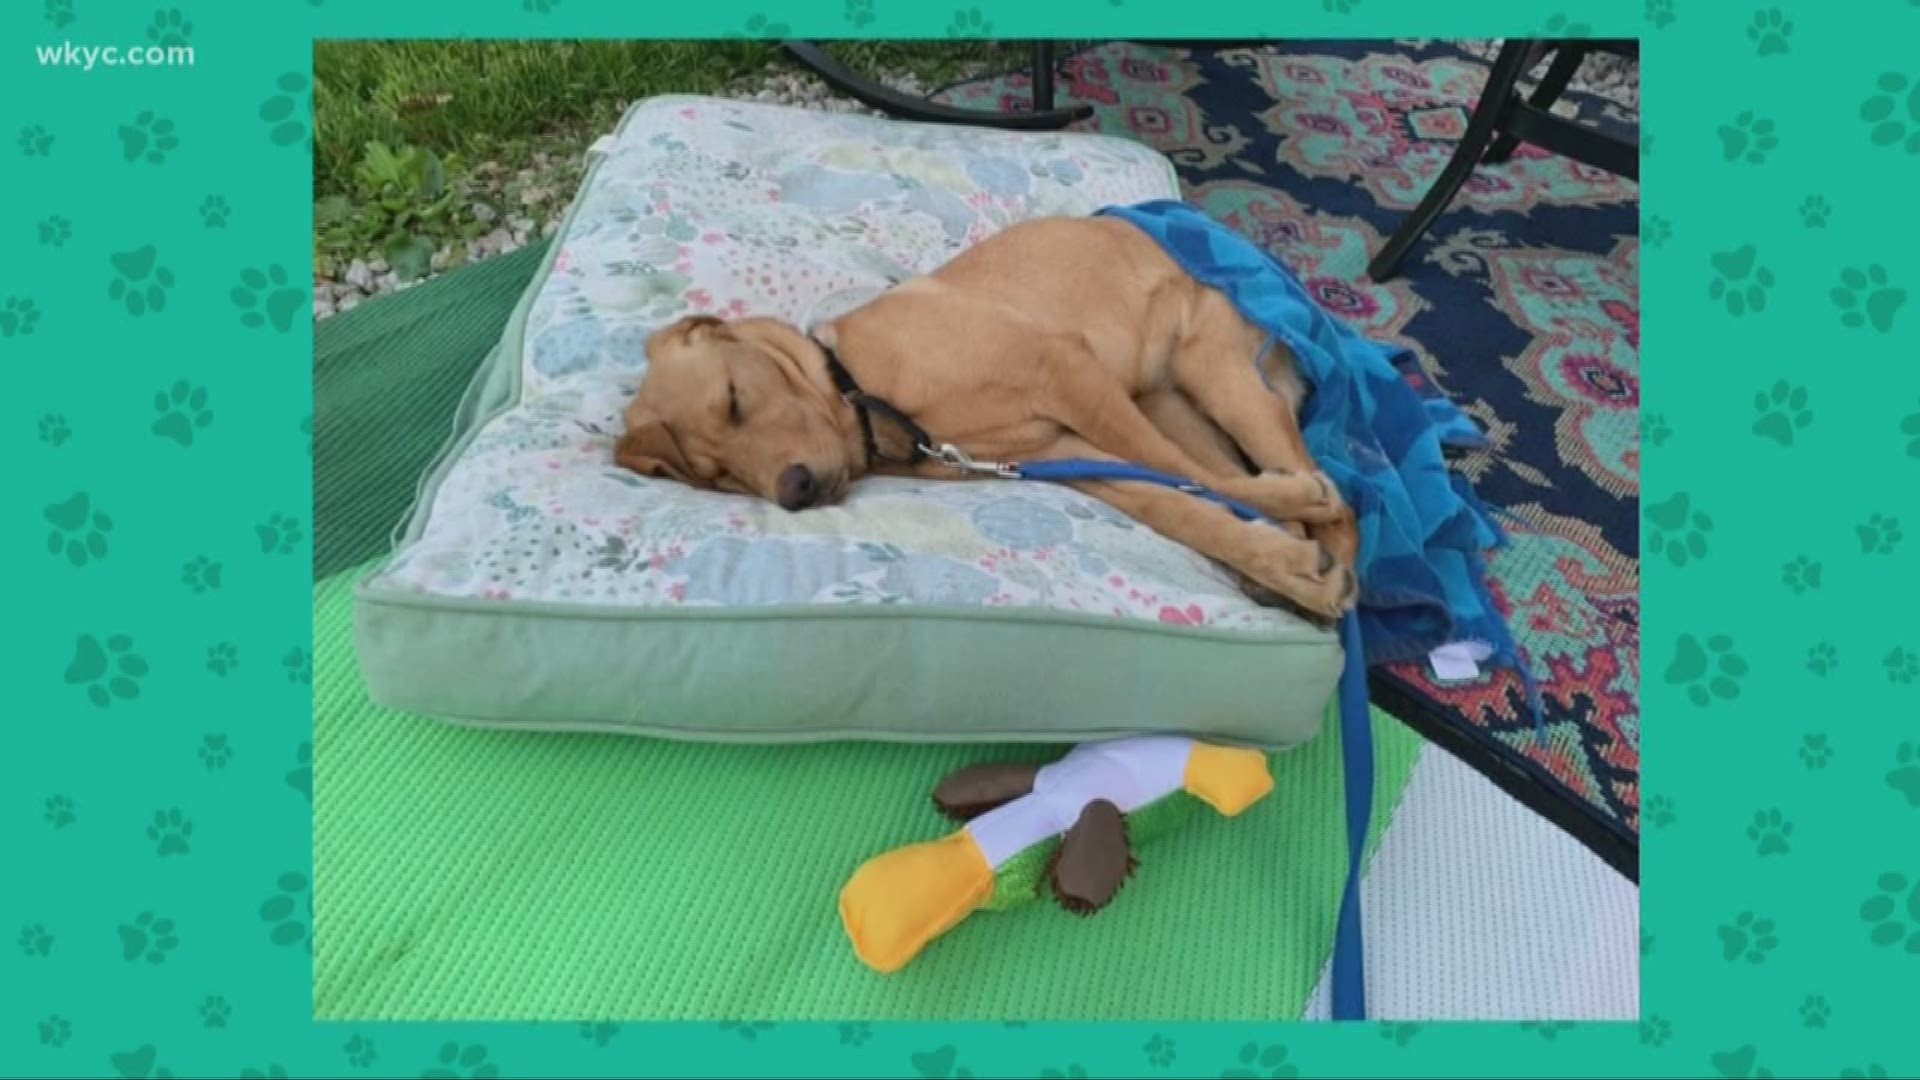 May 30, 2019: Roxy, our Wags 4 Warriors service dog-in-training experienced another first. Kayla DeLorenzo, Roxy’s handler, shared pictures of the pup’s first camping trip. Roxy went along with DeLorenzo and her family. She enjoyed exploring, hanging out by the campfire and long naps on her bed.